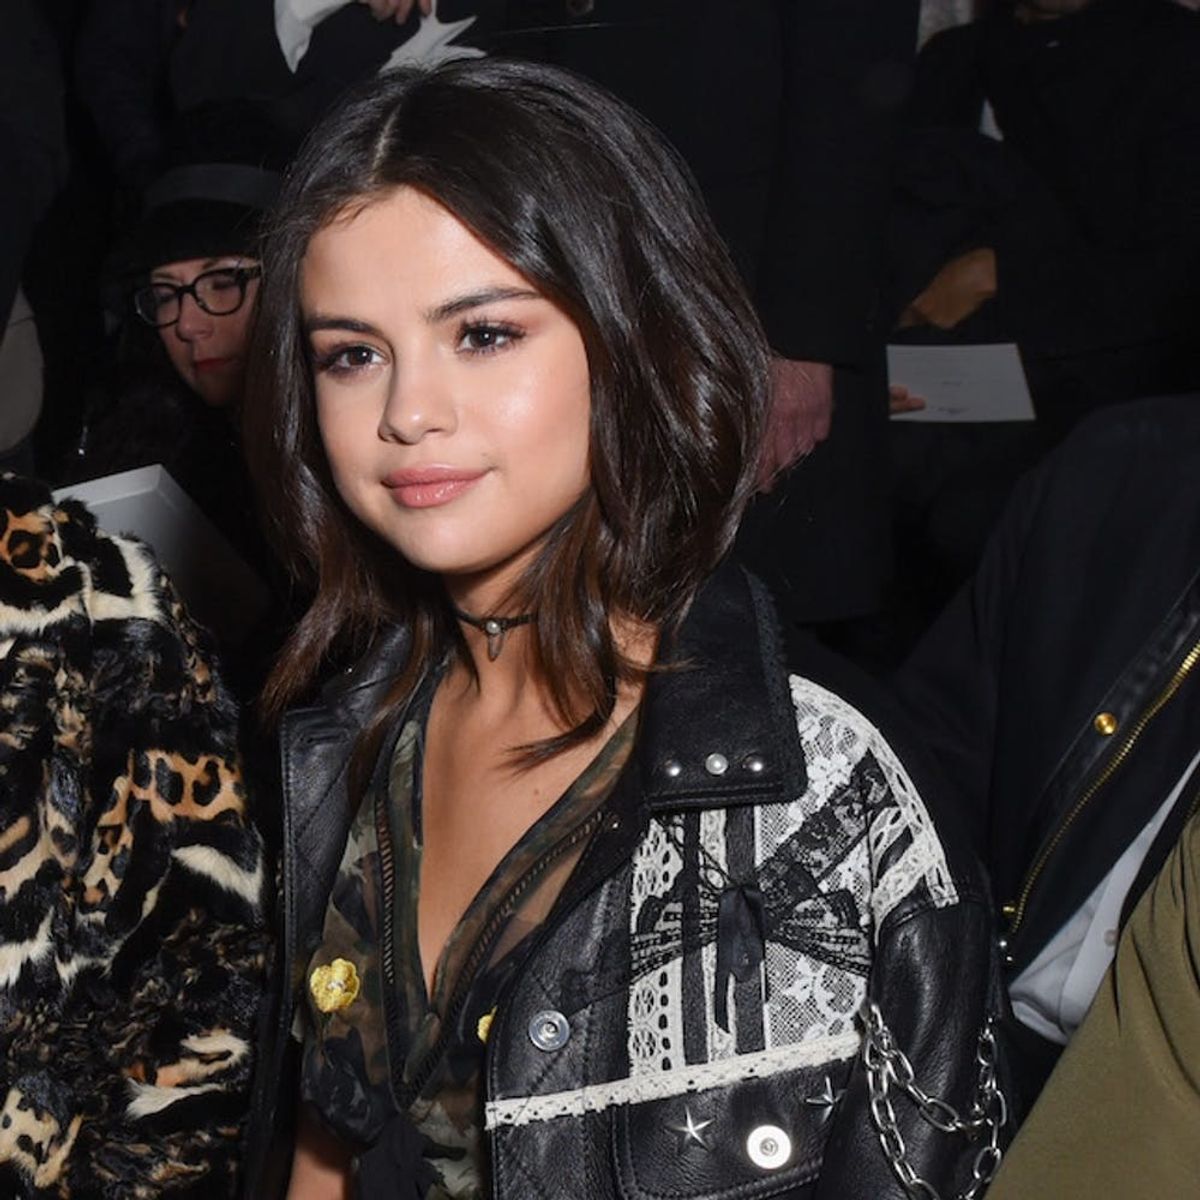 Selena Gomez Just Scored the Most Liked Instagram (Again) With This Dress